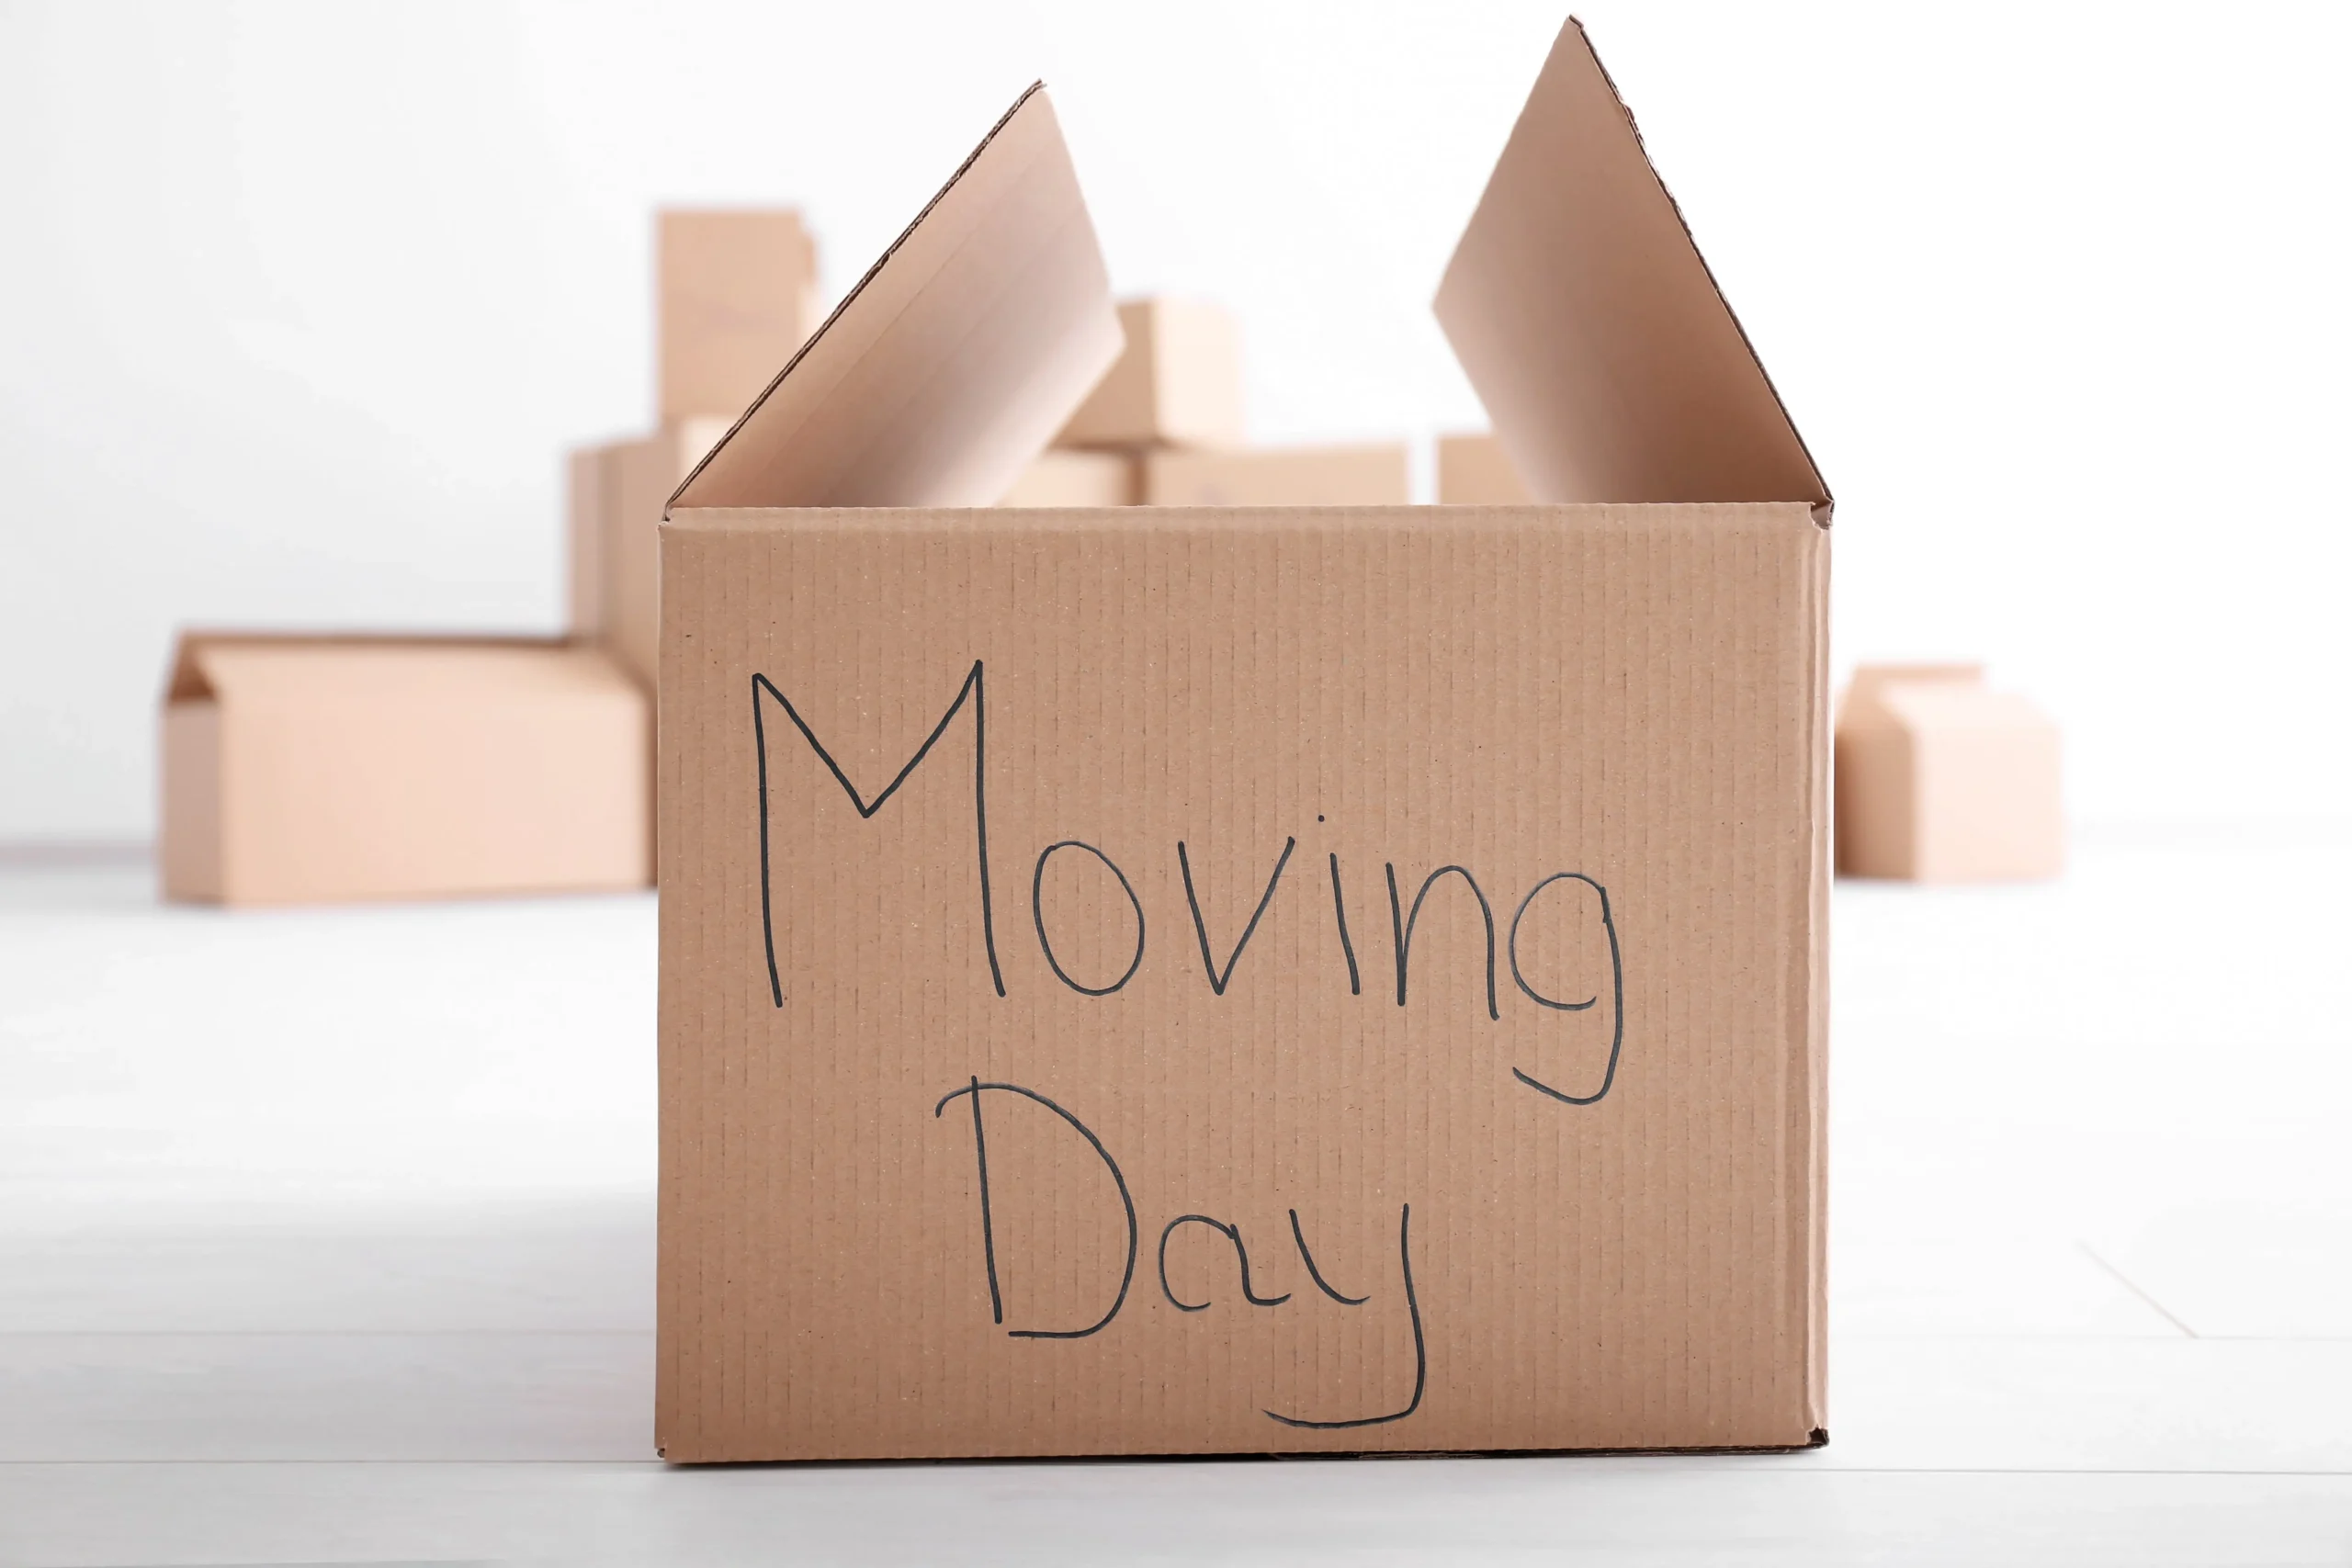 Packing Services to Take the Stress Out of Moving Day